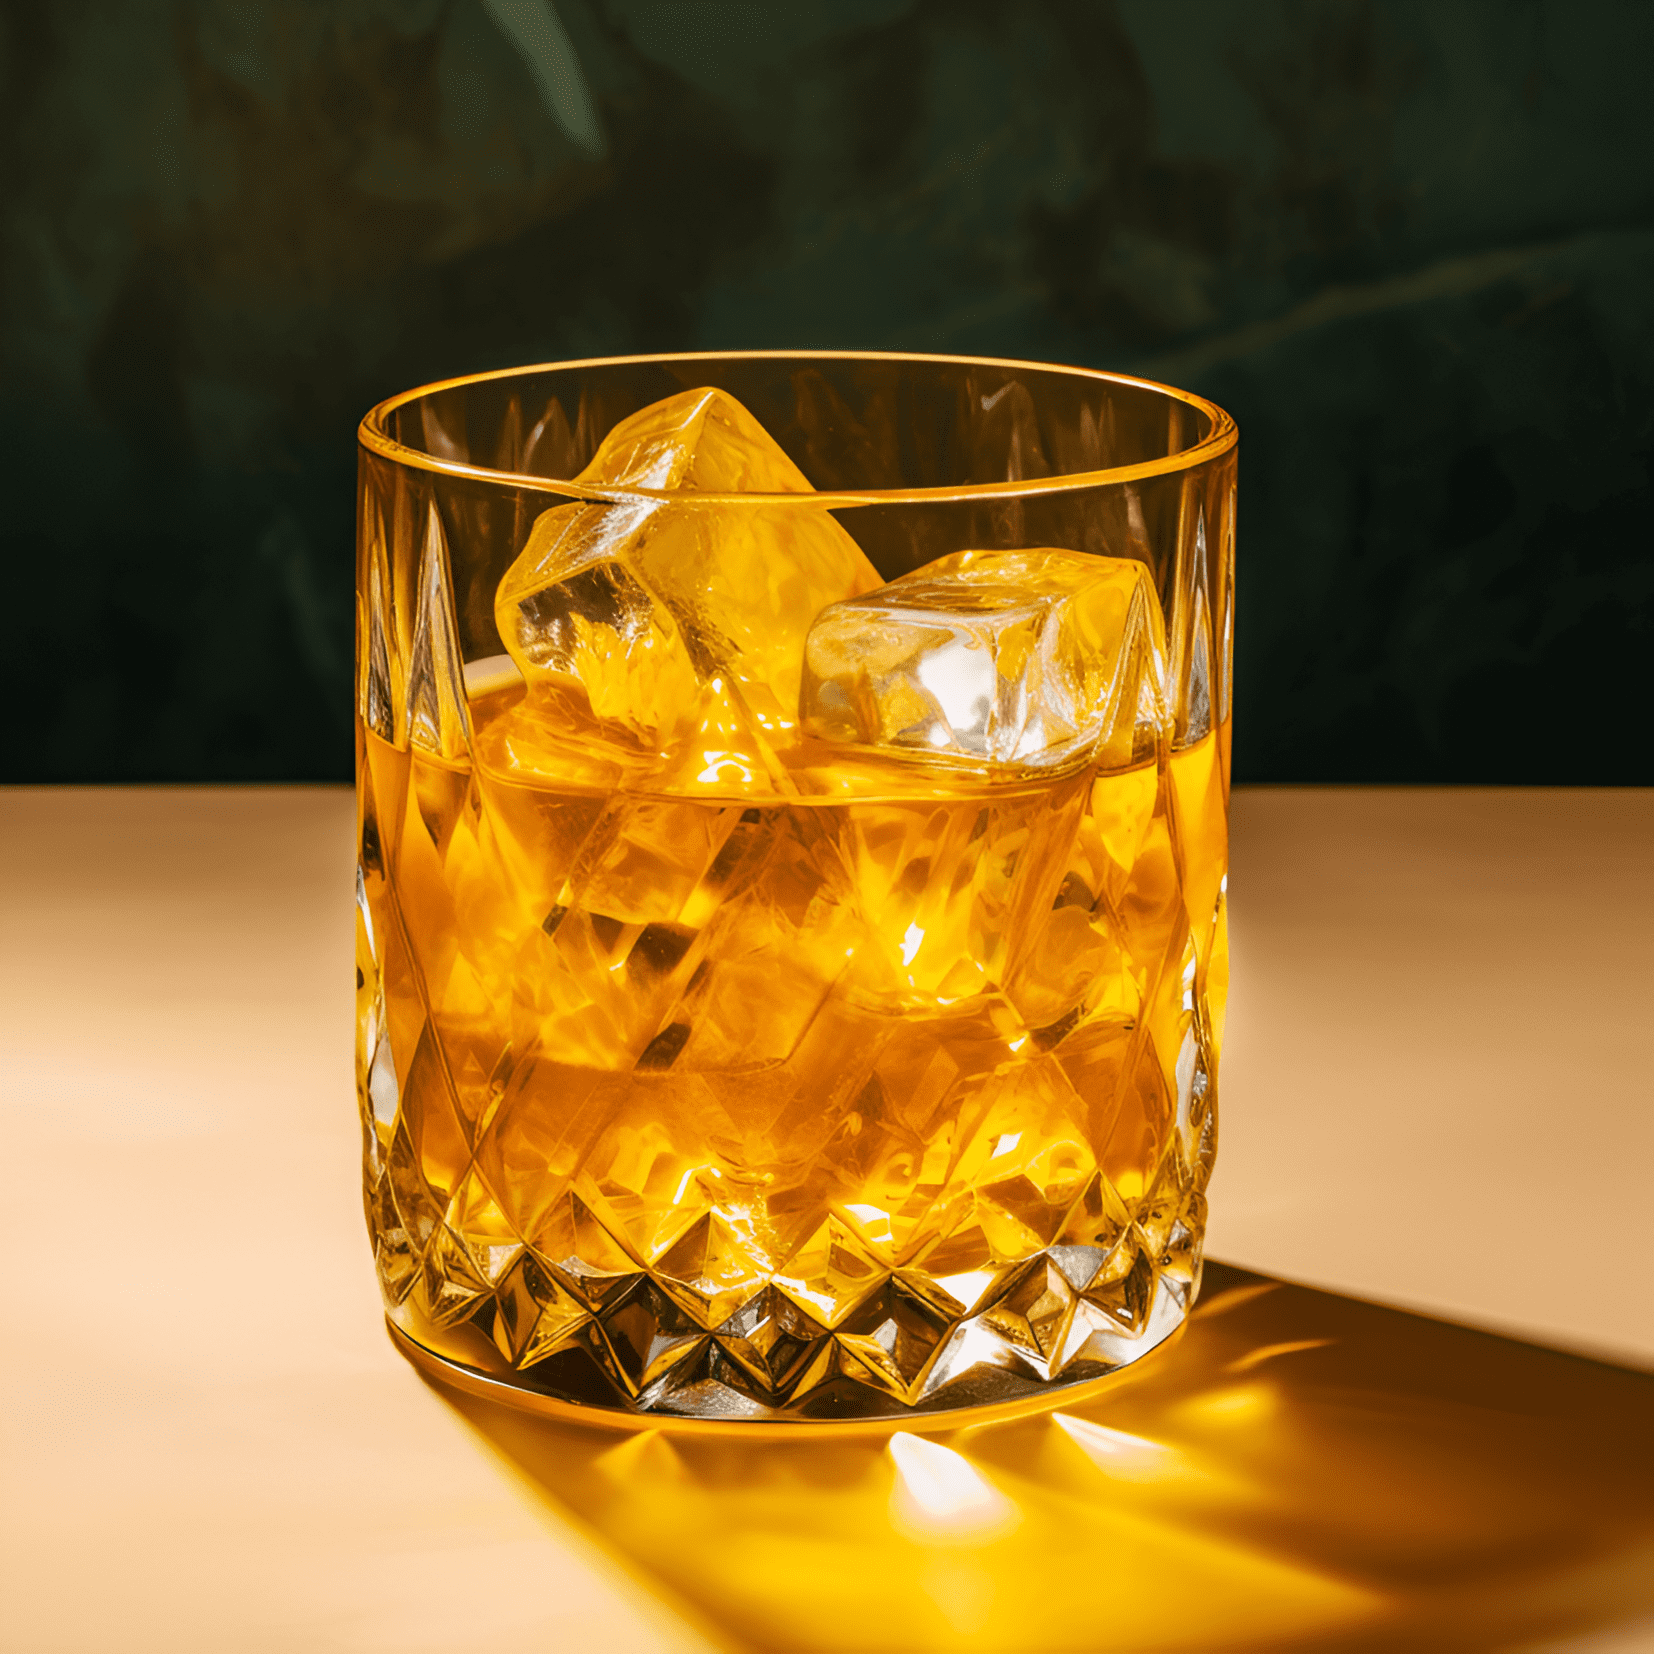 Godmother Cocktail Recipe - The Godmother cocktail is a smooth, sweet, and slightly nutty drink with a hint of warmth from the vodka. It is well-balanced, with the amaretto providing a rich, almond-like sweetness that complements the strong, clean taste of the vodka.